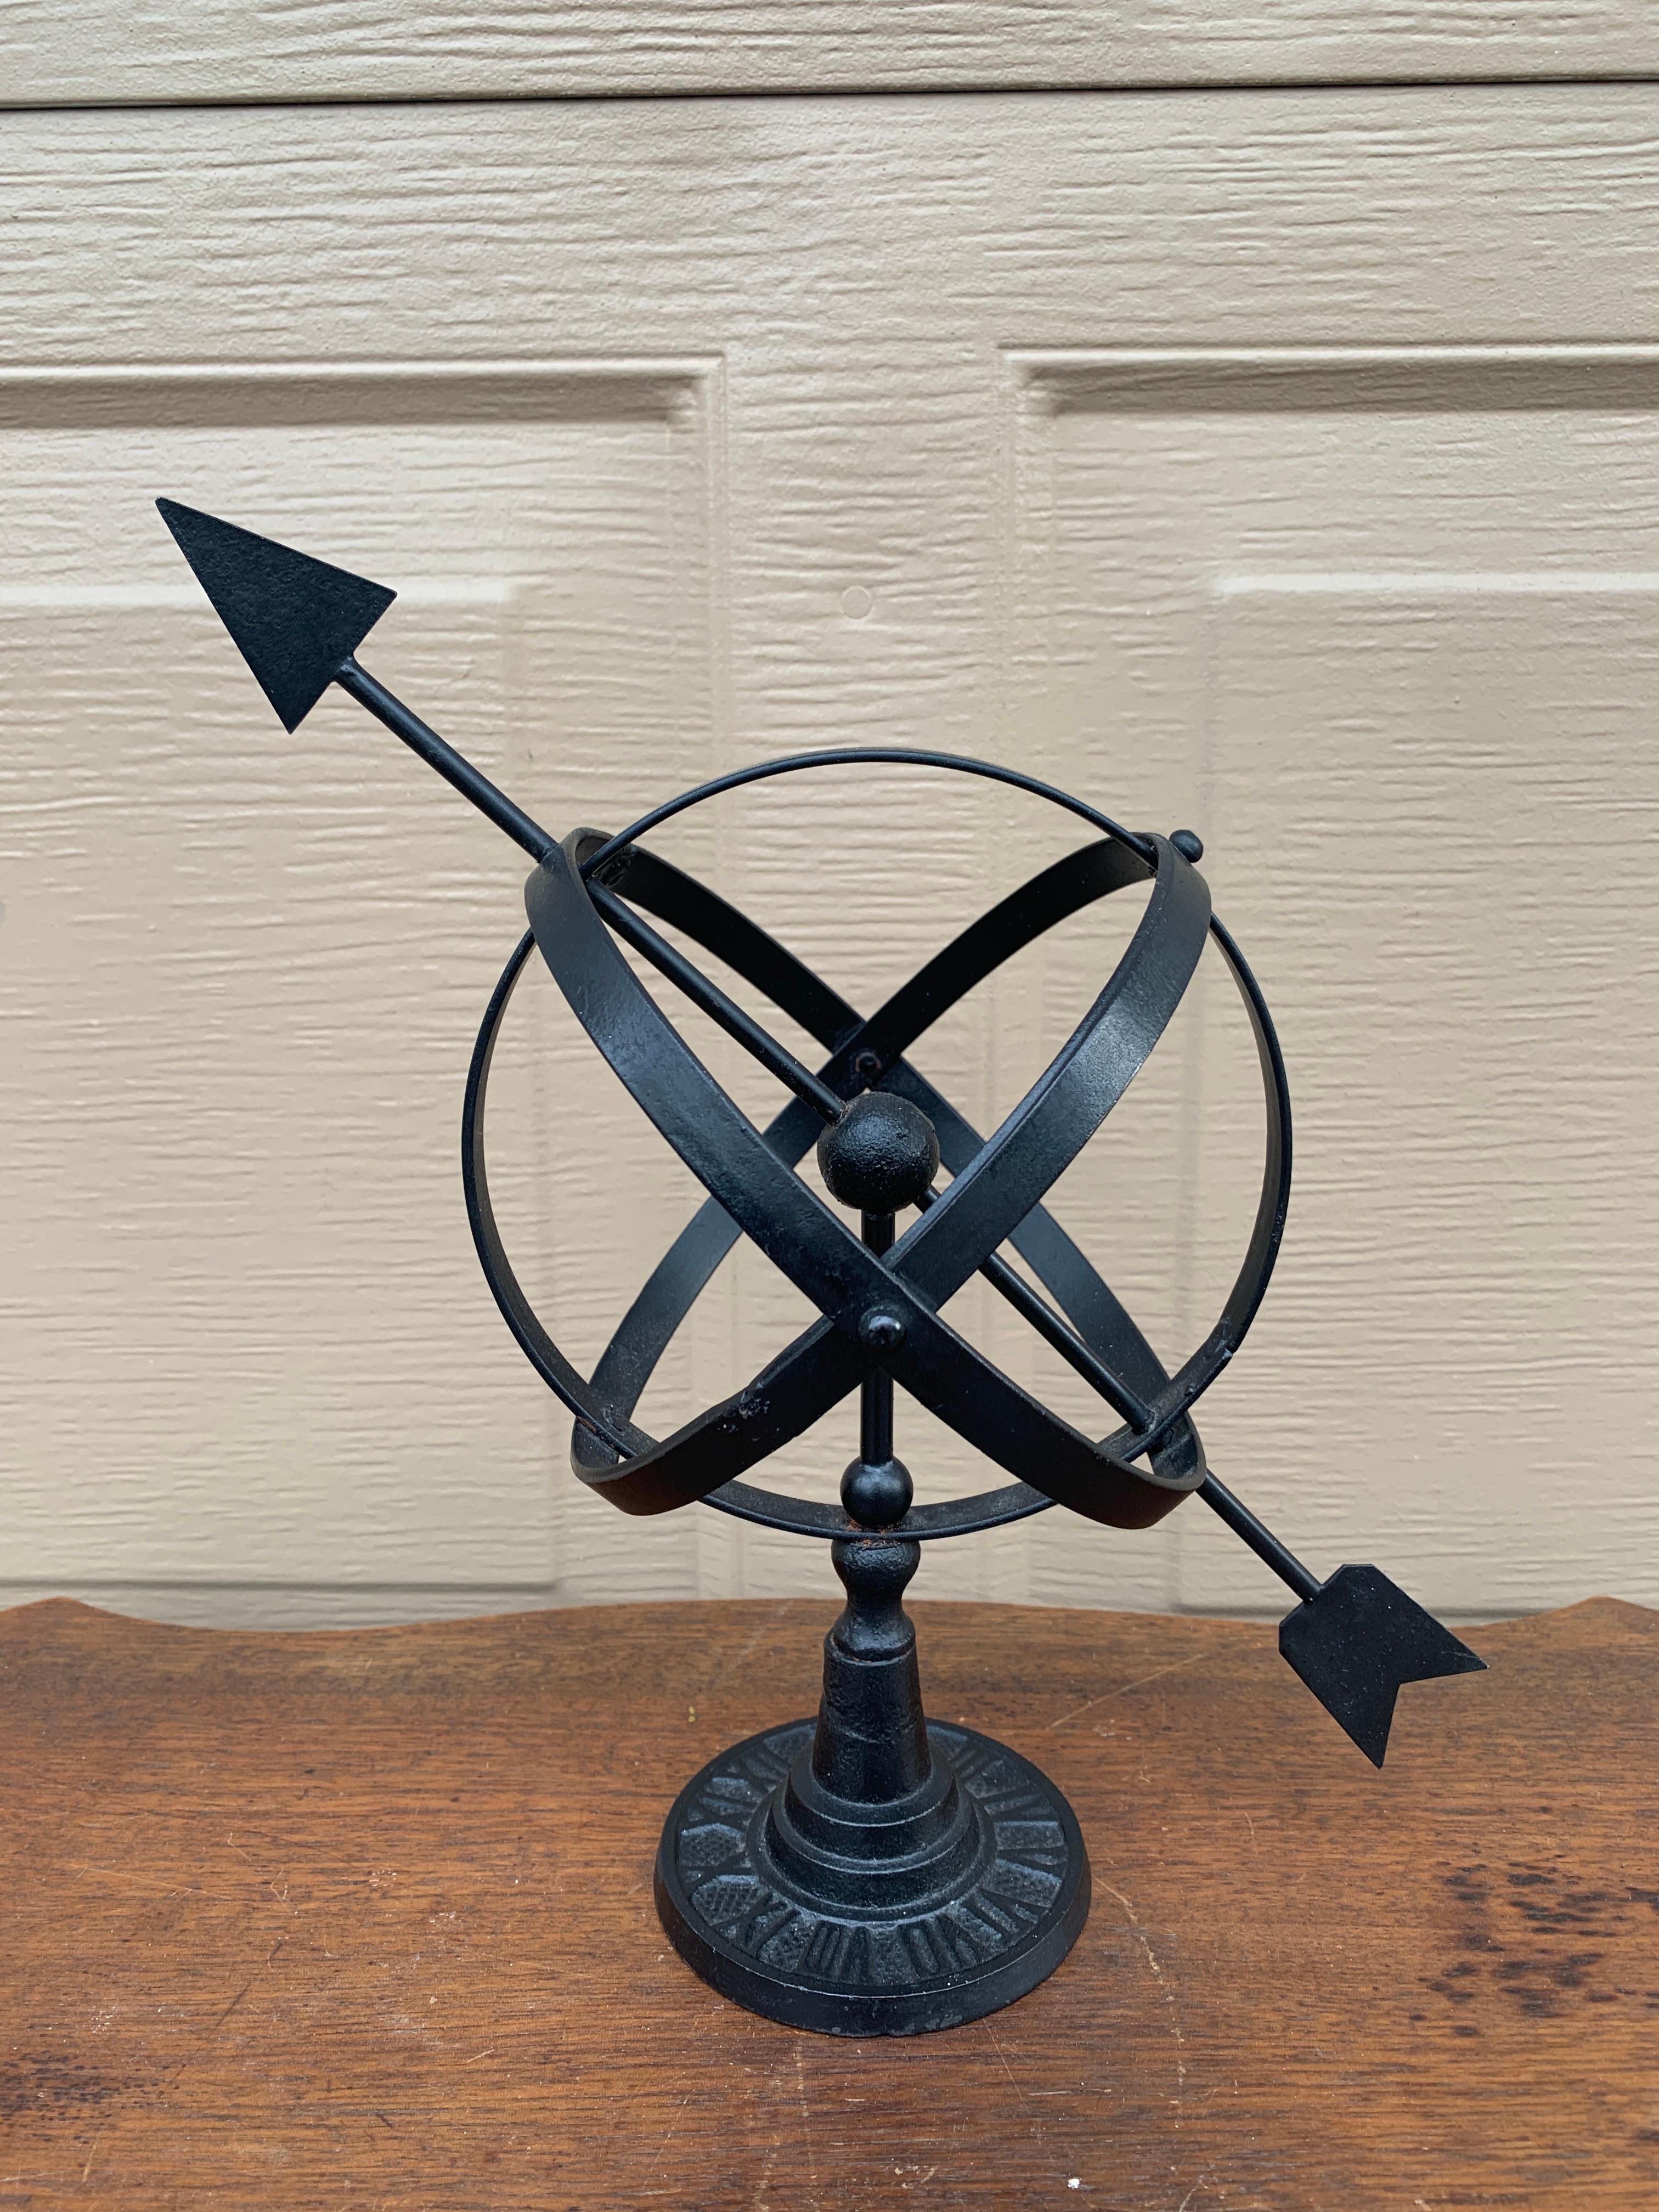 A stunning vintage English country or Neoclassical style black iron garden armillary sundial with Roman numerals

USA, Late 20th Century

Measures: 9.5